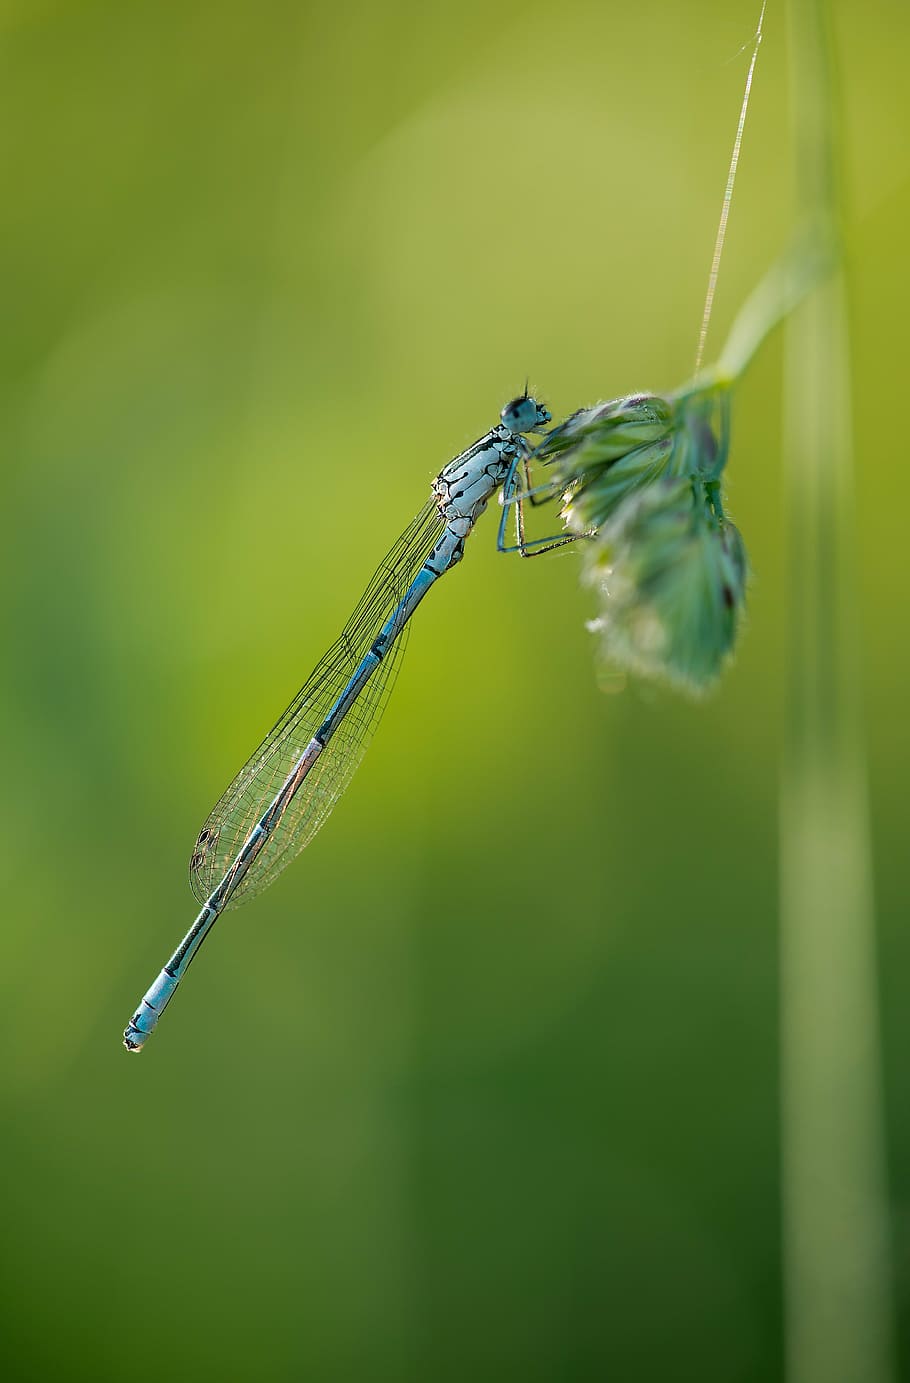 slender dragonfly, dragonfly, insect, nature, blue, macro, spring, animal, summer, damselfly